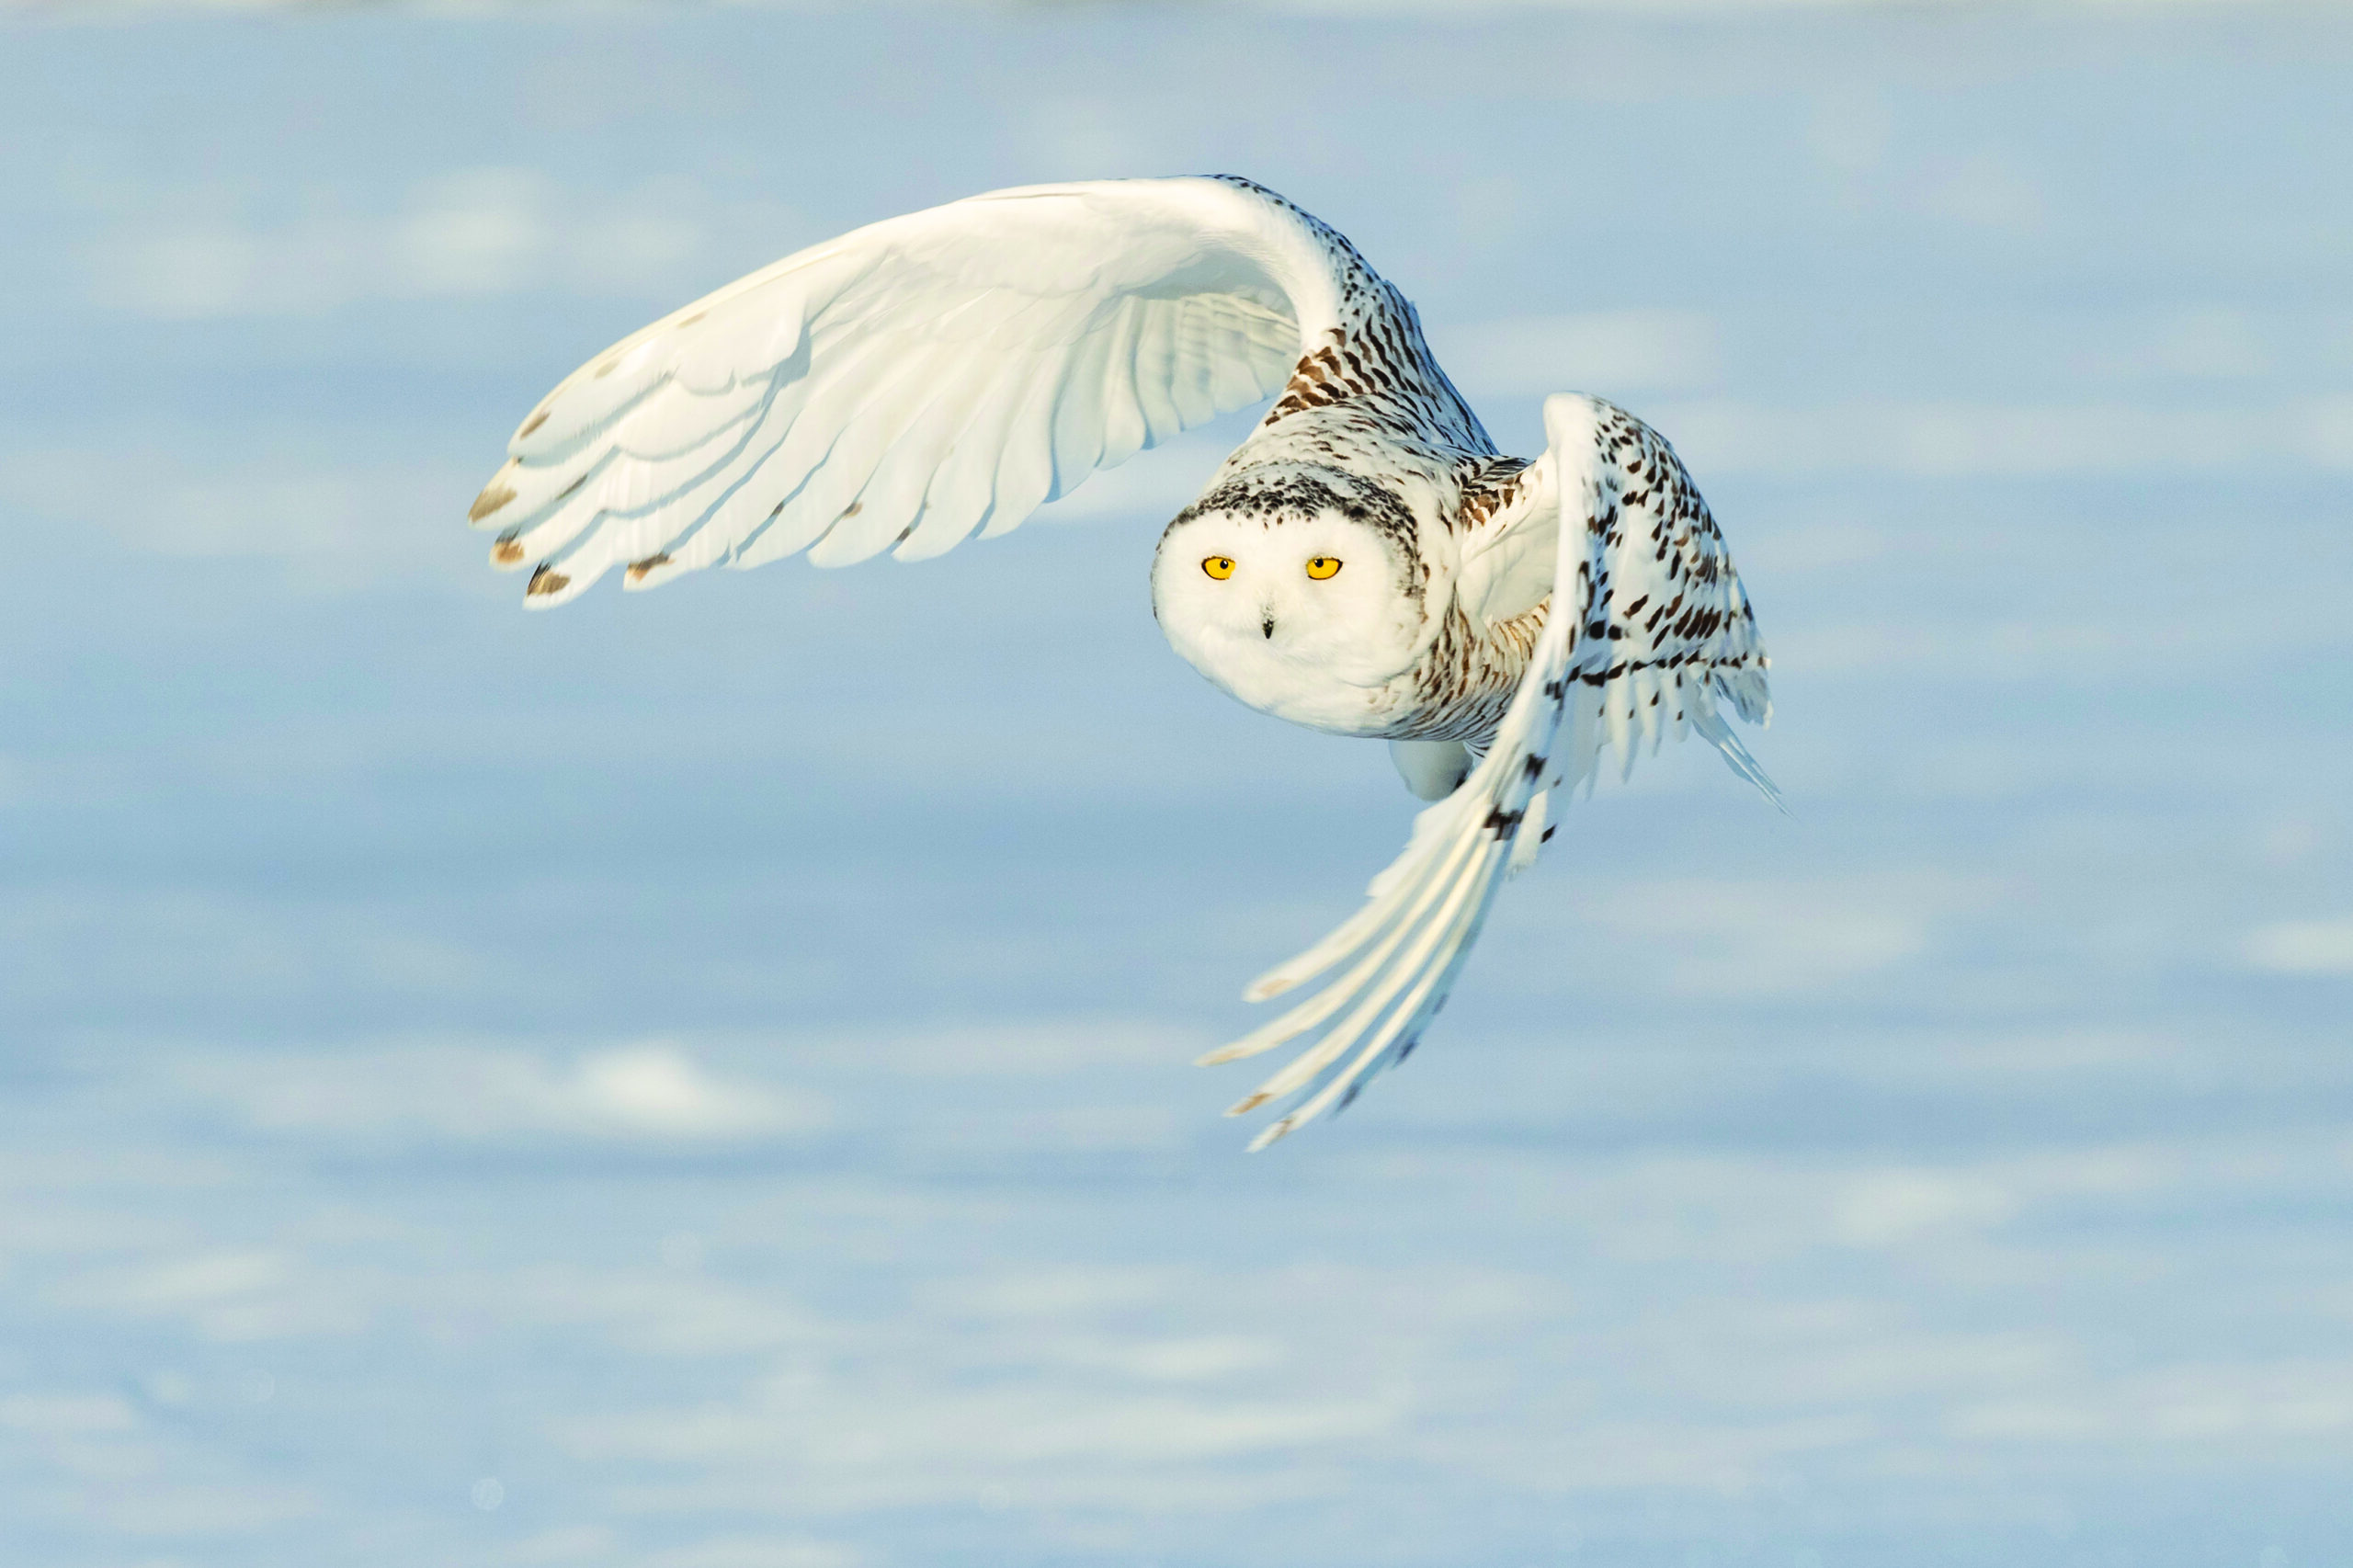 nowy owl flying over snow-covered landscape on a sunny day.